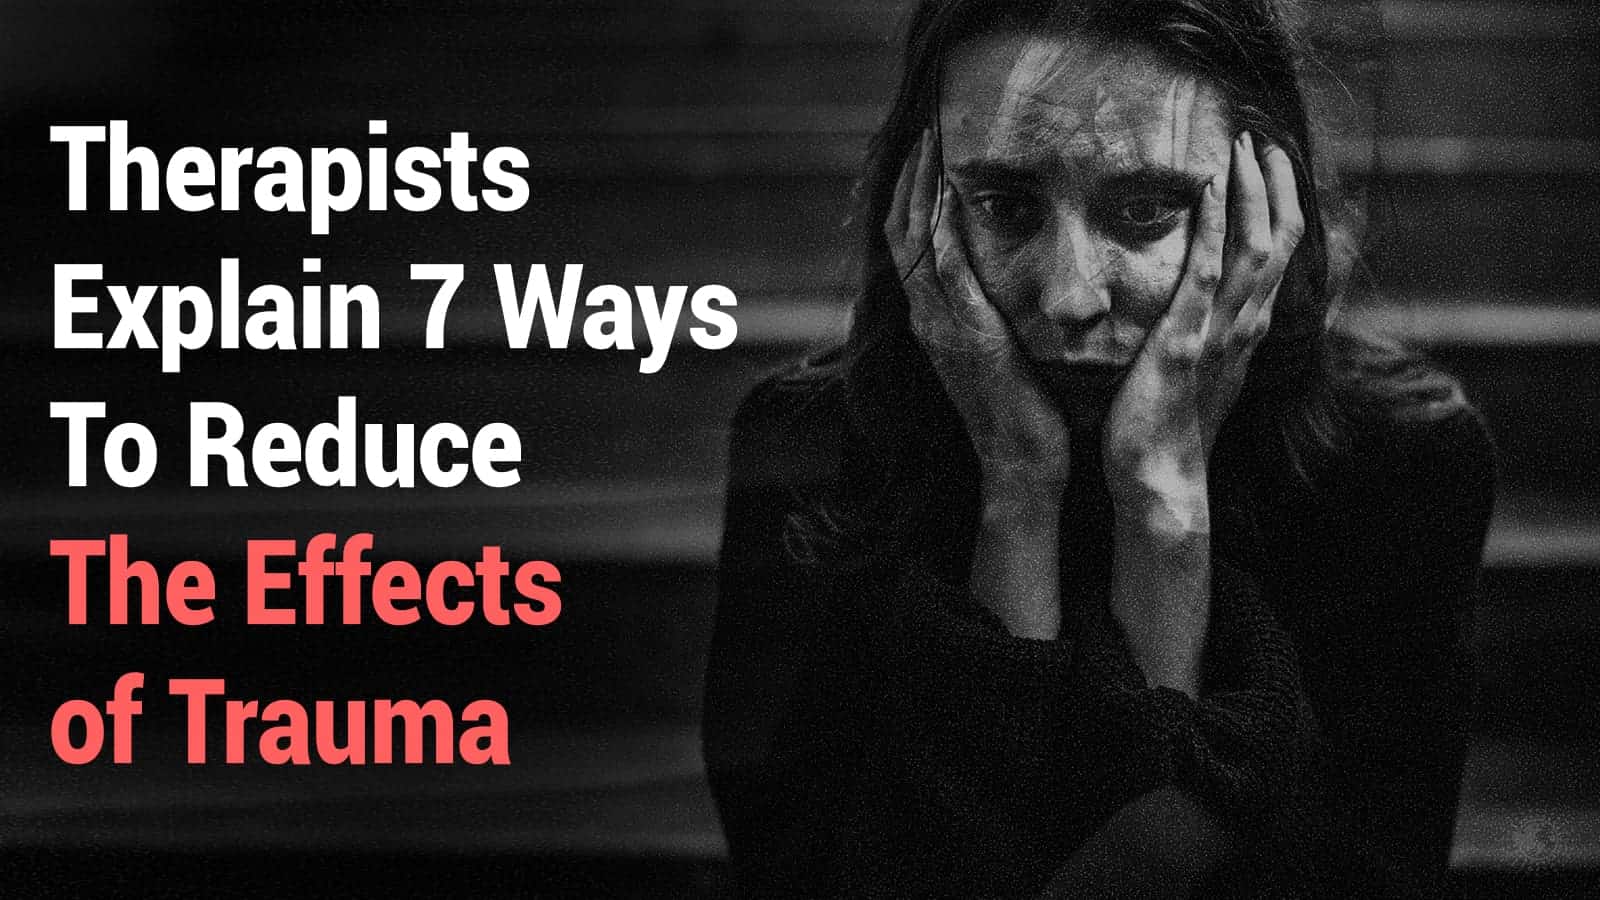 Therapists Explain 7 Ways To Reduce The Effects of Trauma